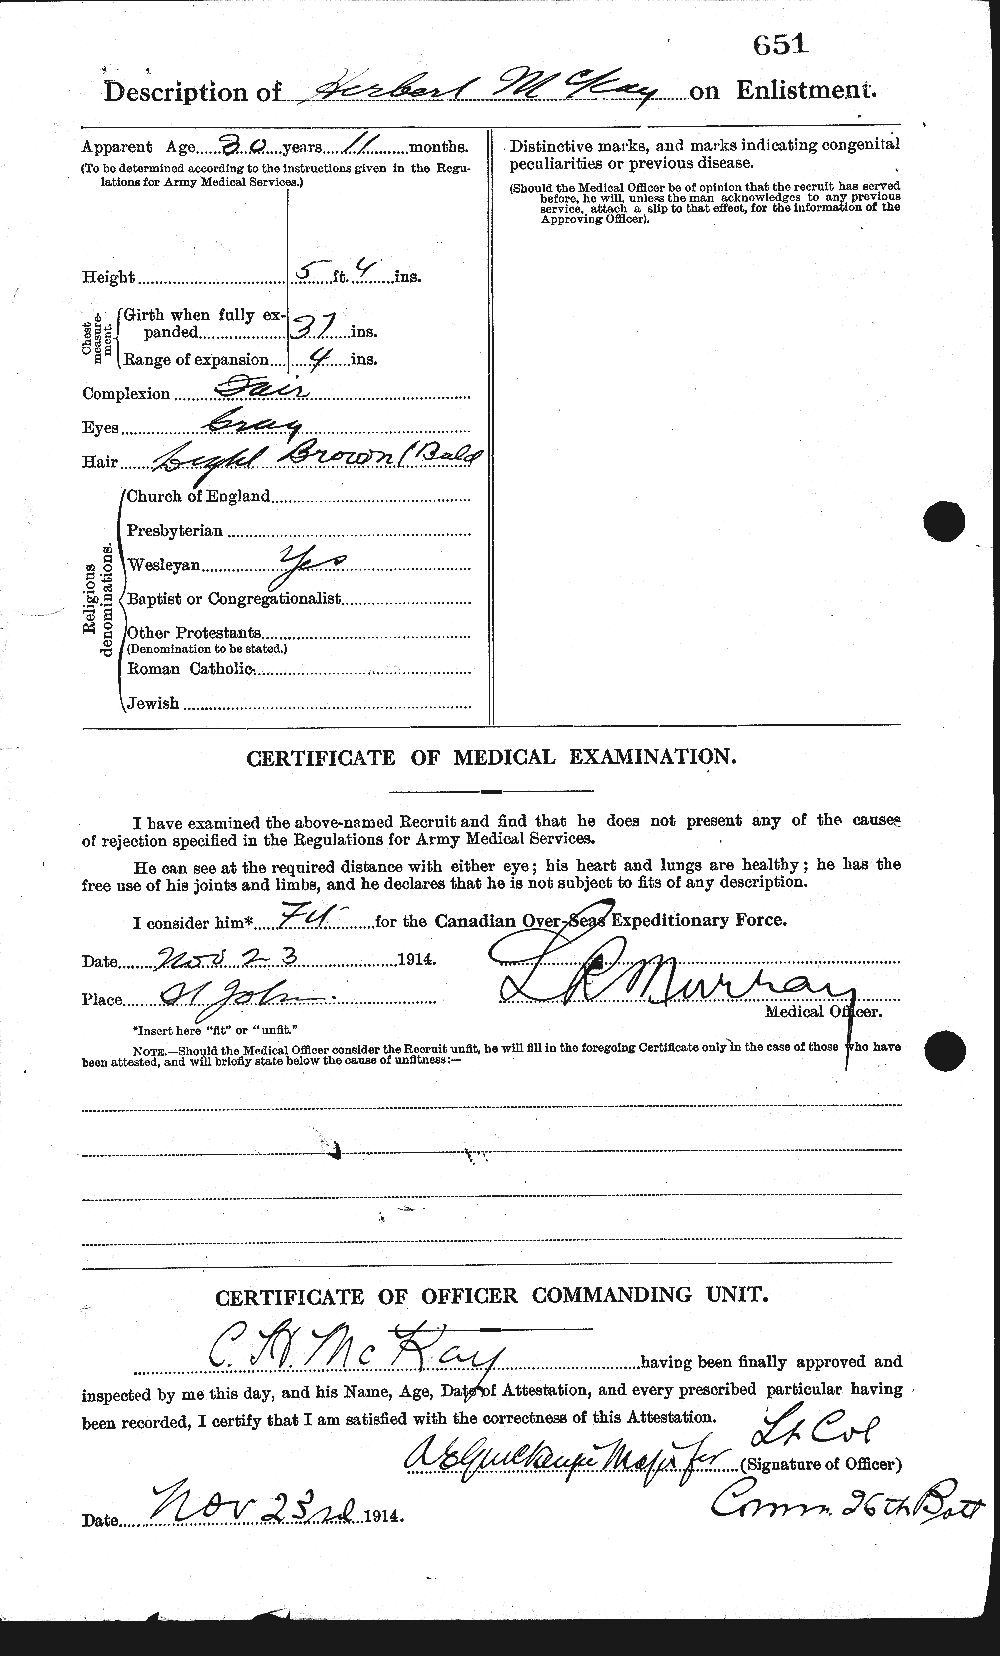 Personnel Records of the First World War - CEF 531046b